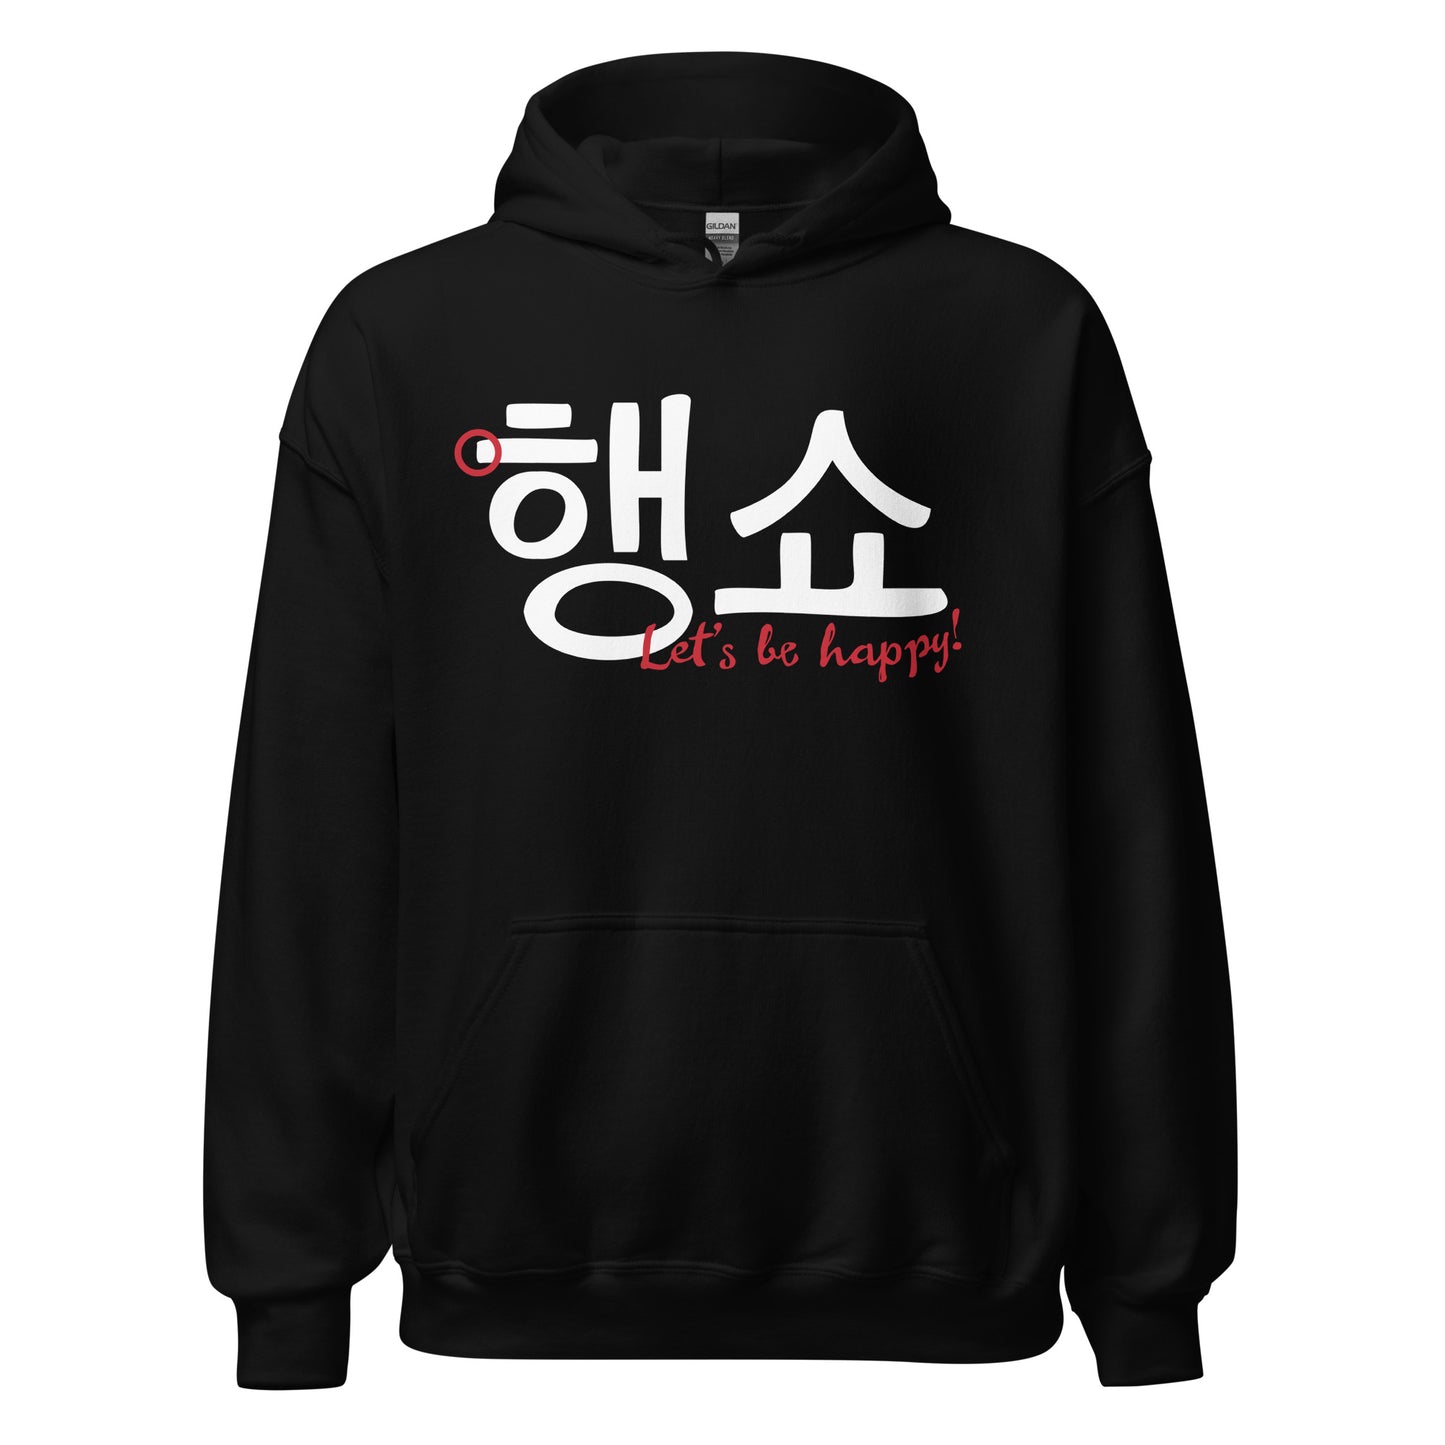 Black hoodie with the expression 'Let's be happy!' in Hangul and English on the front